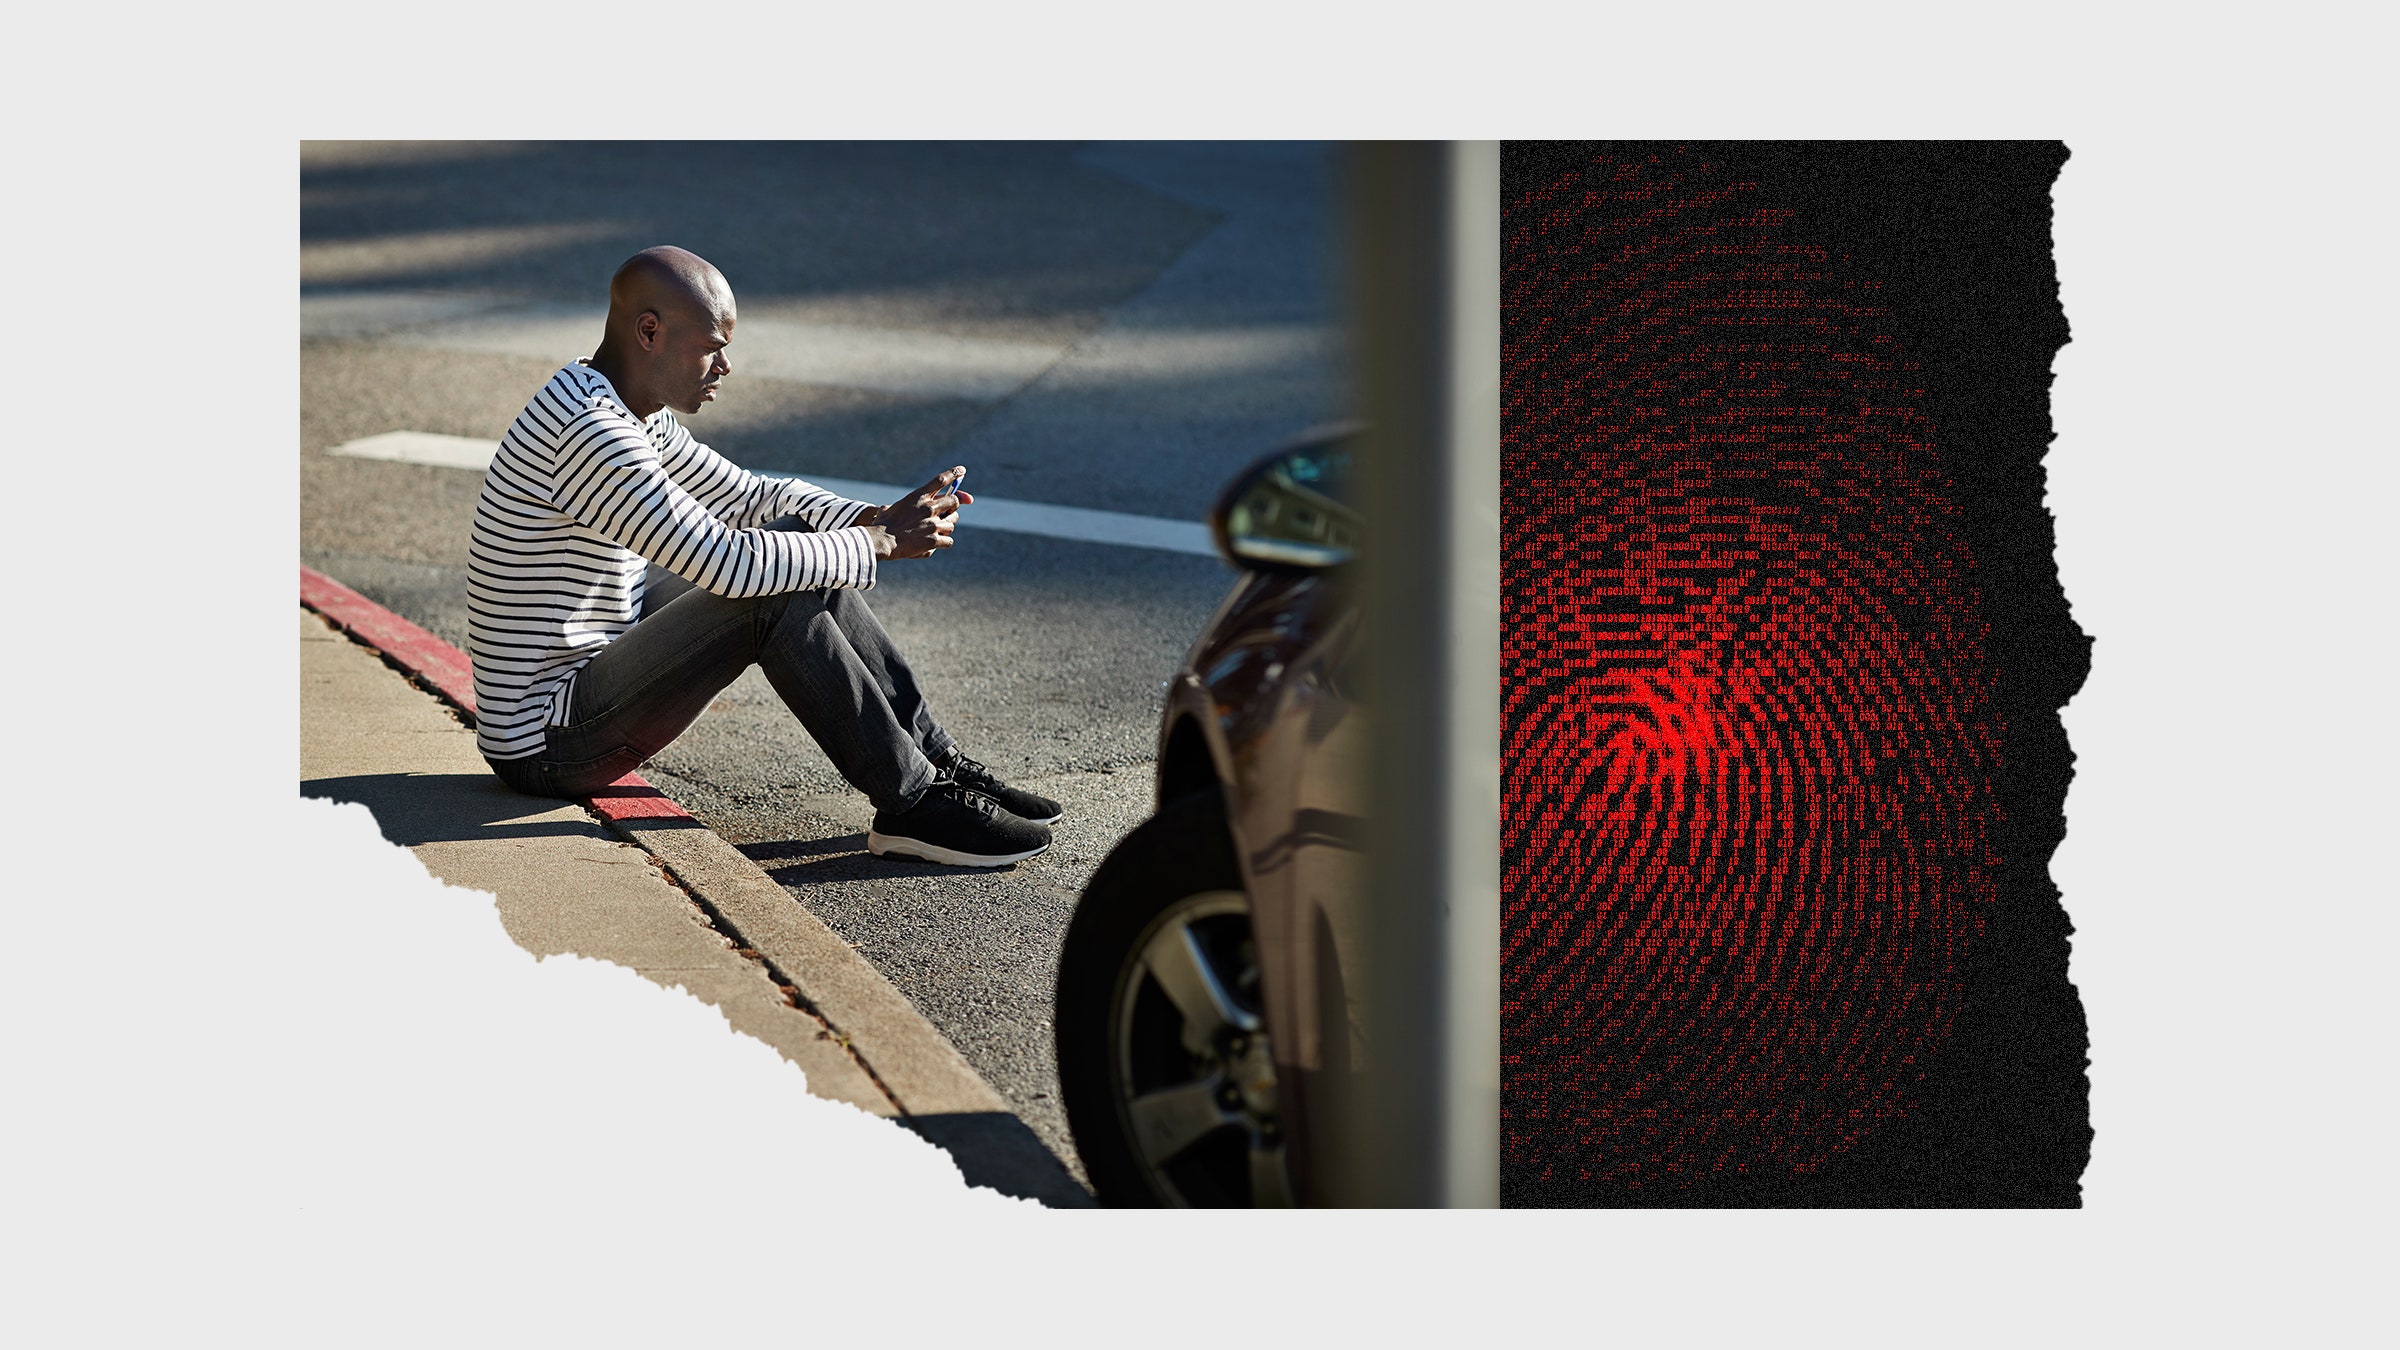 collage of images of Black man sitting on curb and illustration of fingerprint made of binary code